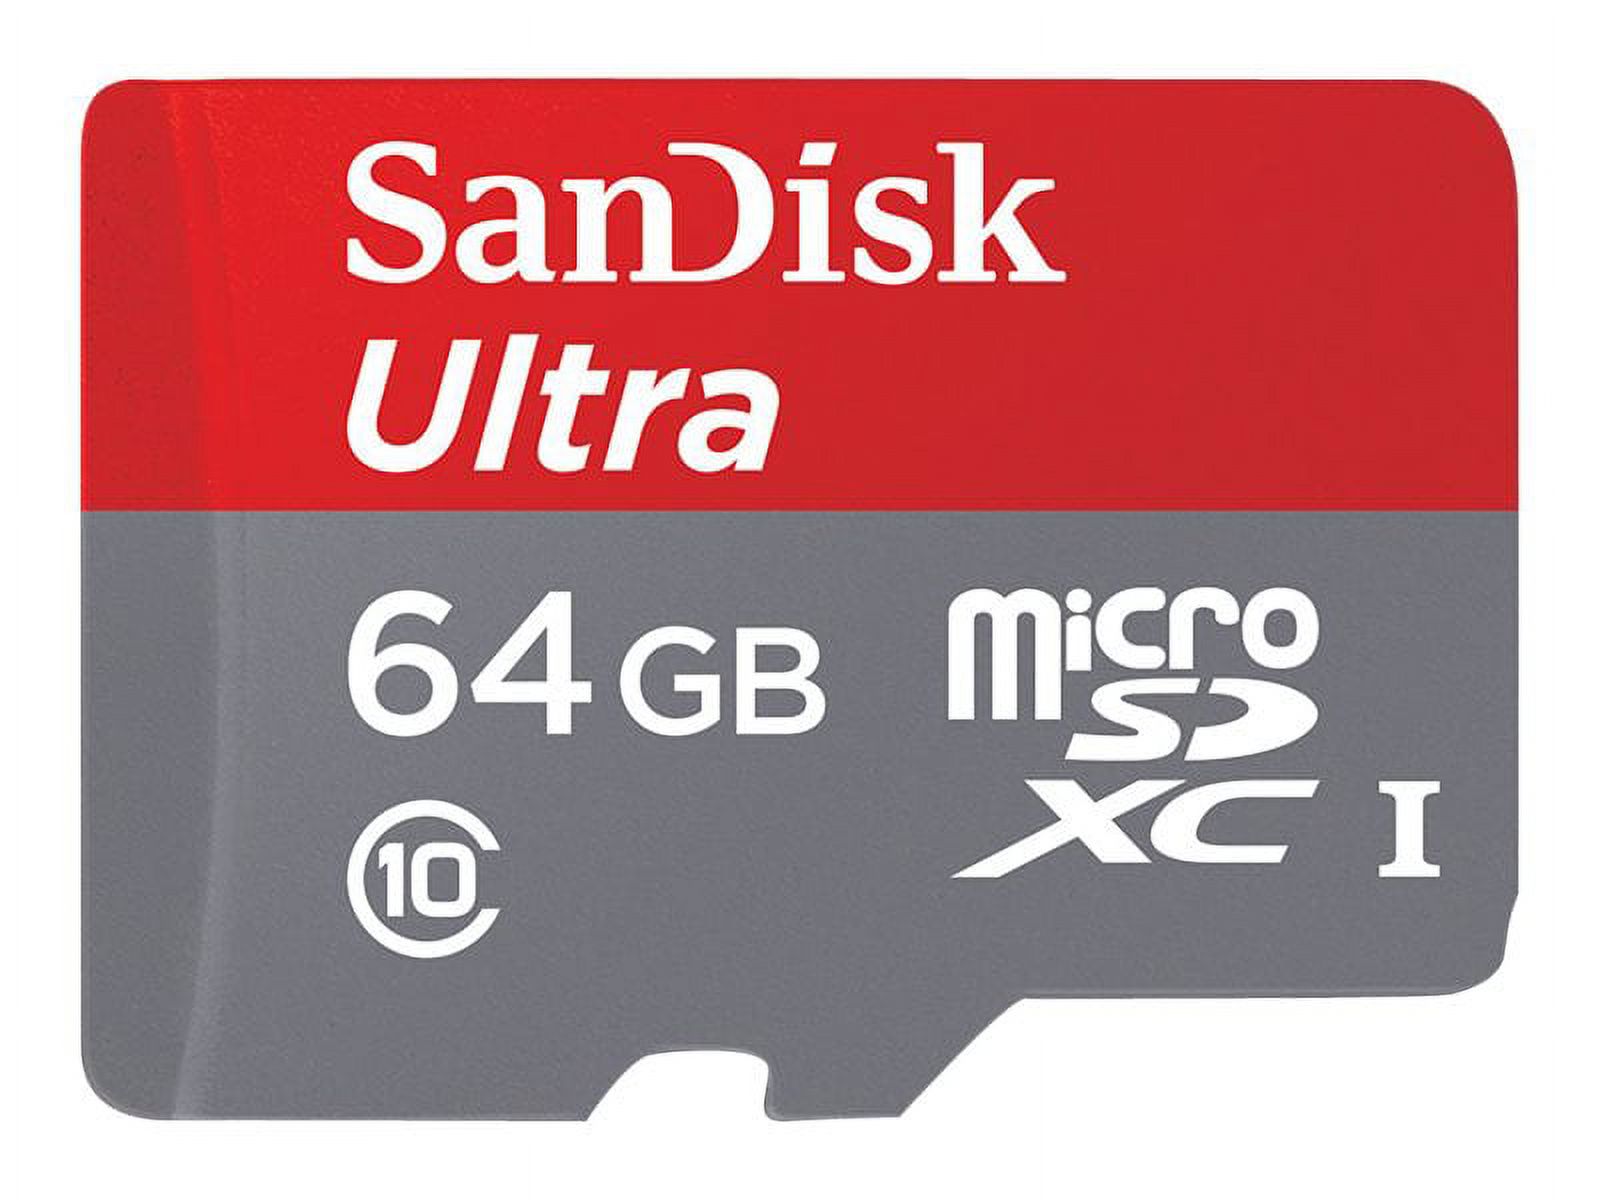 SanDisk Ultra plus MicroSD UHS-I Card for Cameras - image 2 of 6